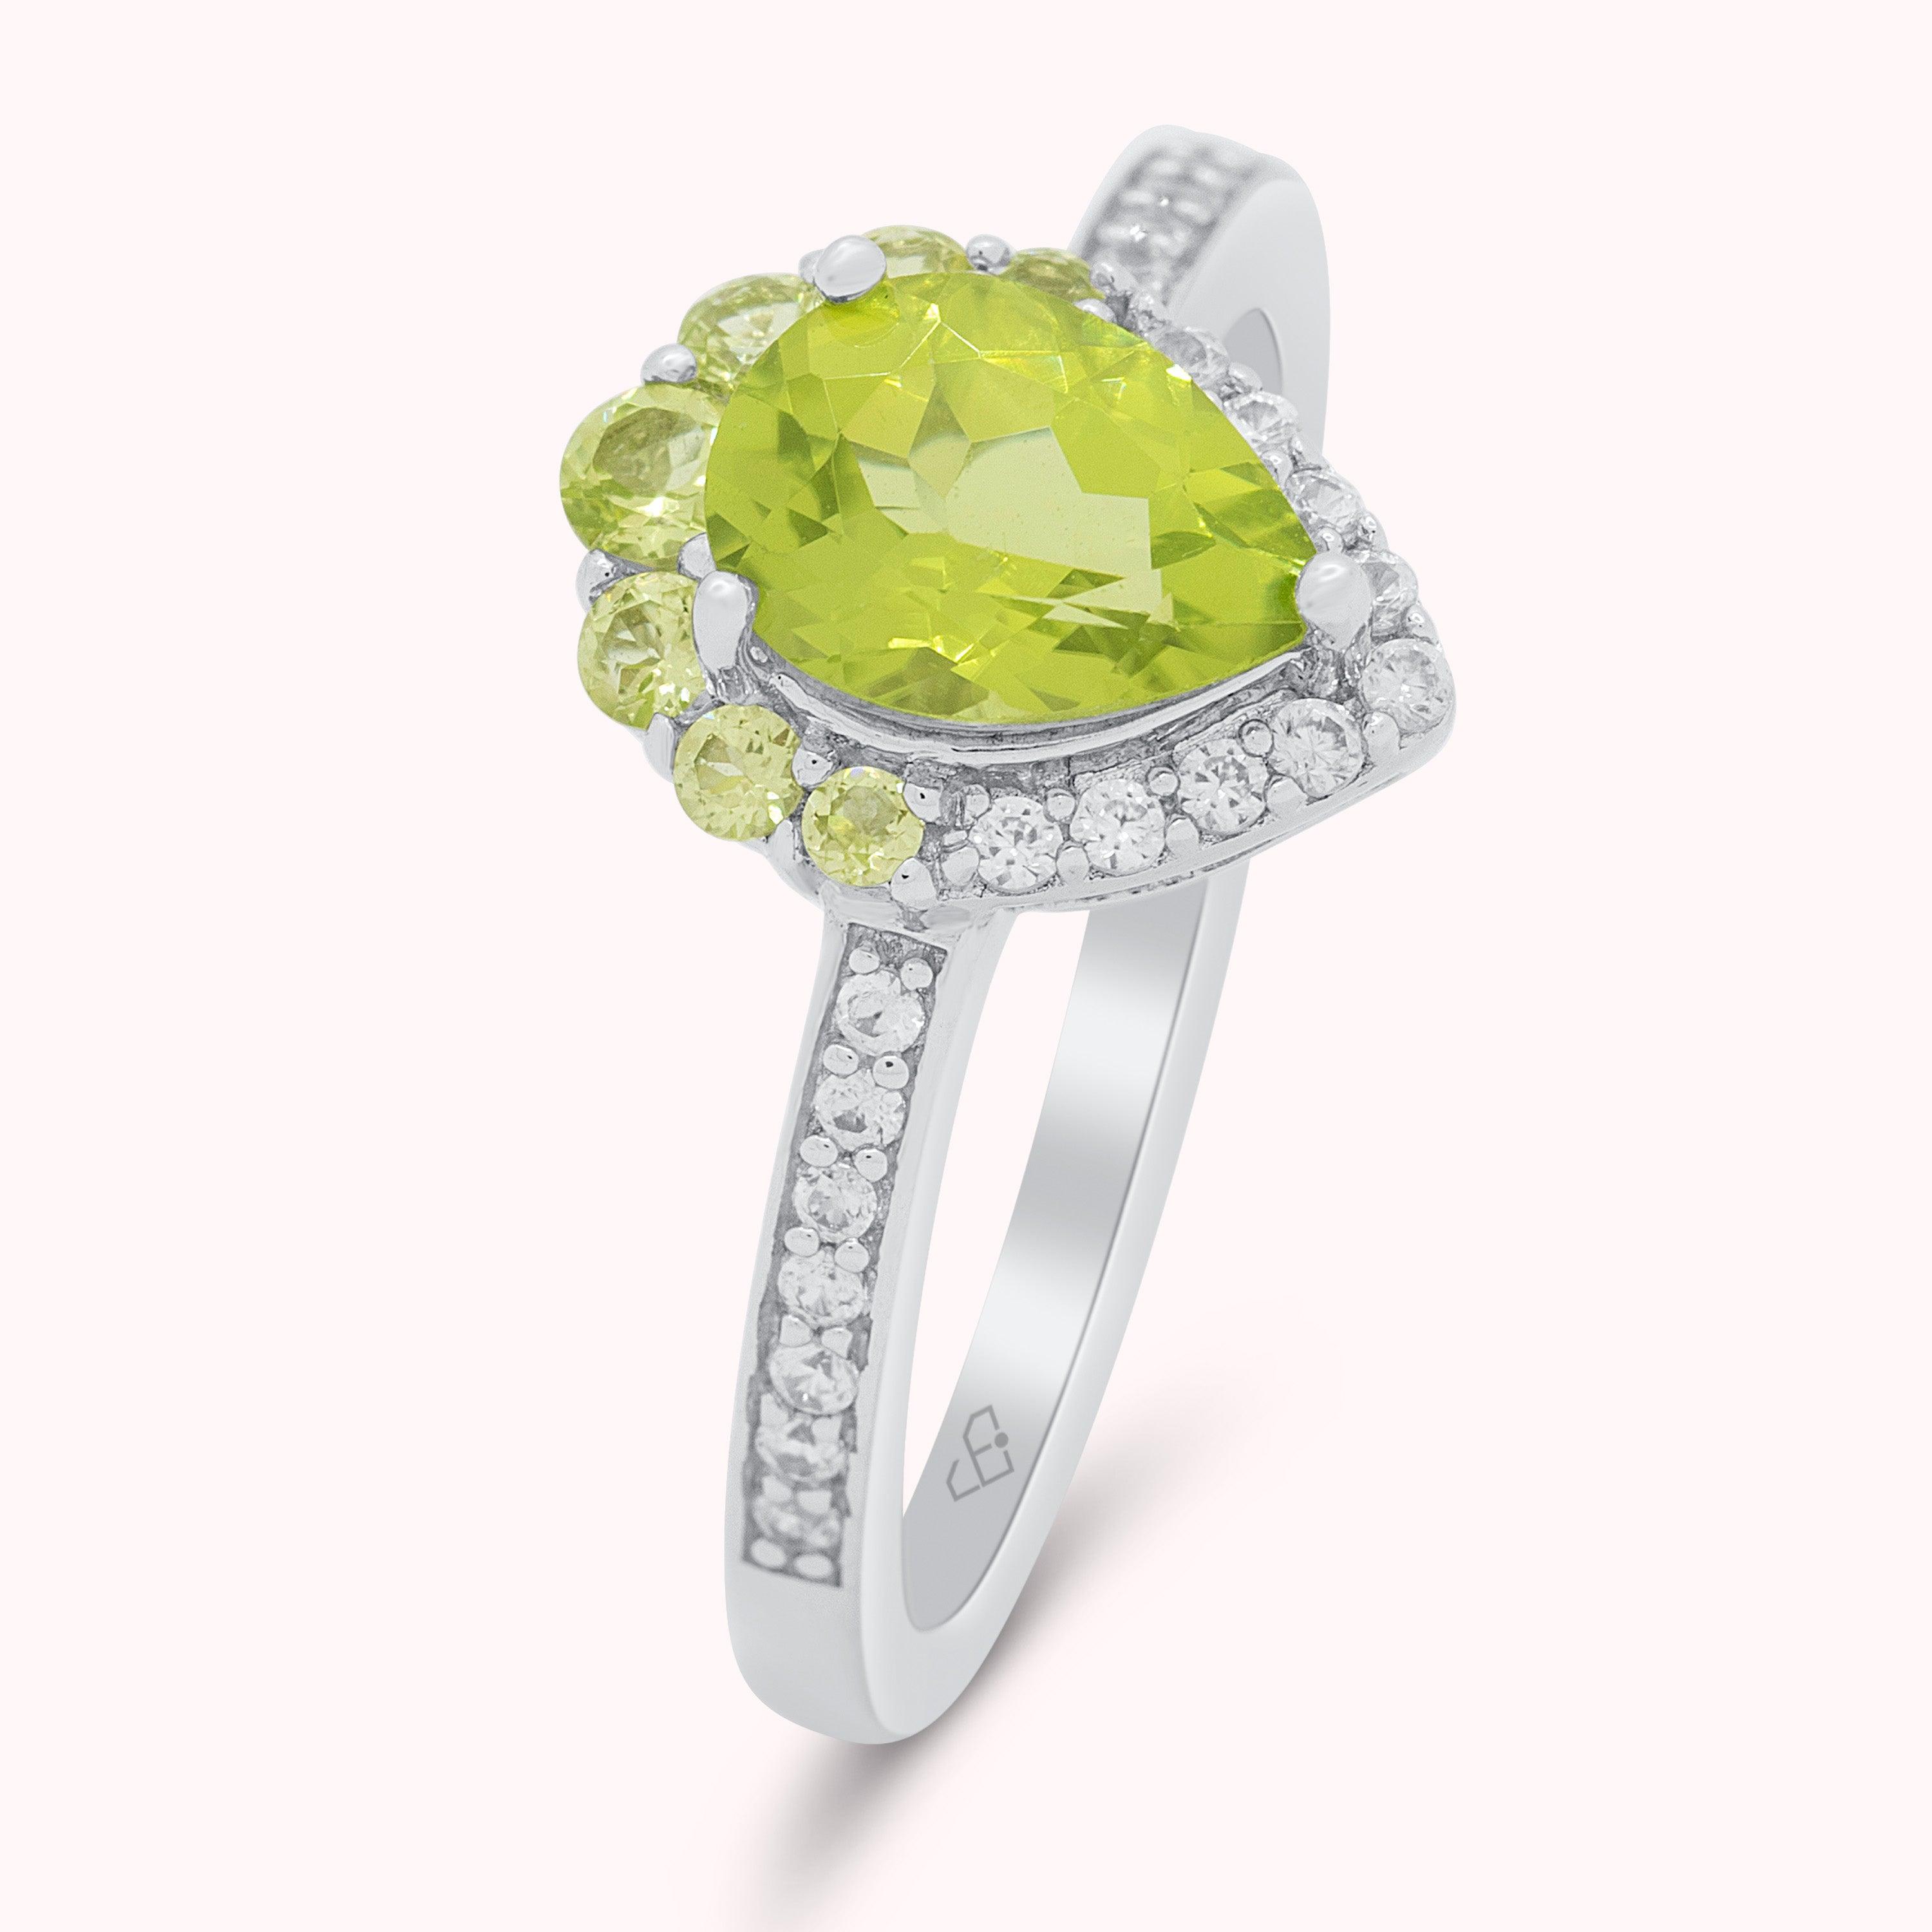 Elegant Natural Green Peridot and Zircon Gemstones Sterling Silver Ring, August Birthstone Trendy Christmas Gift, Daily Unique Design